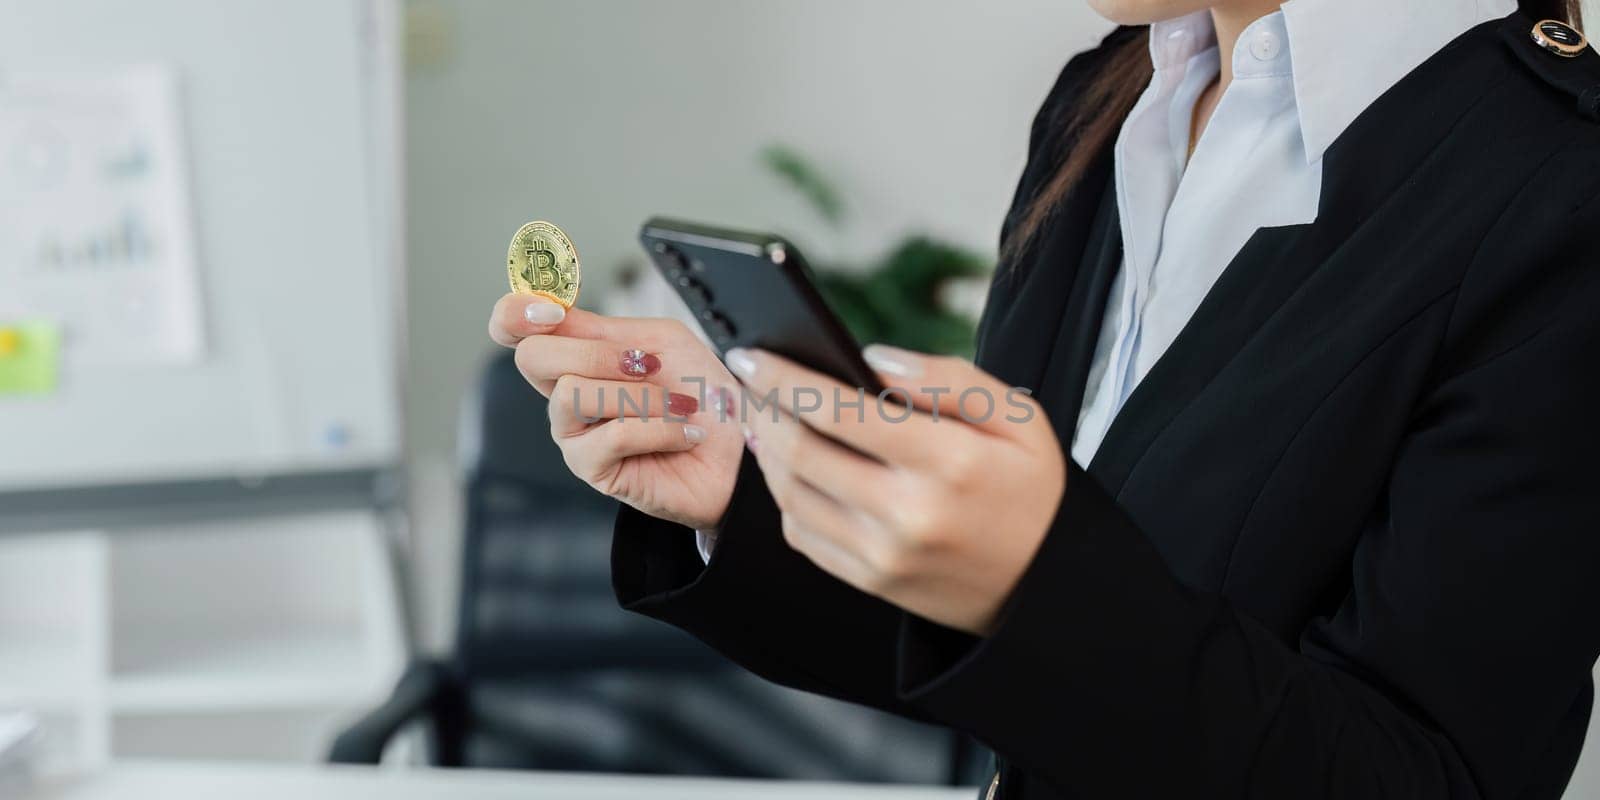 A woman is holding a coin and looking at her phone. Concept of focus and determination as she looks at her phone, possibly checking stock prices or financial information. The woman's attire